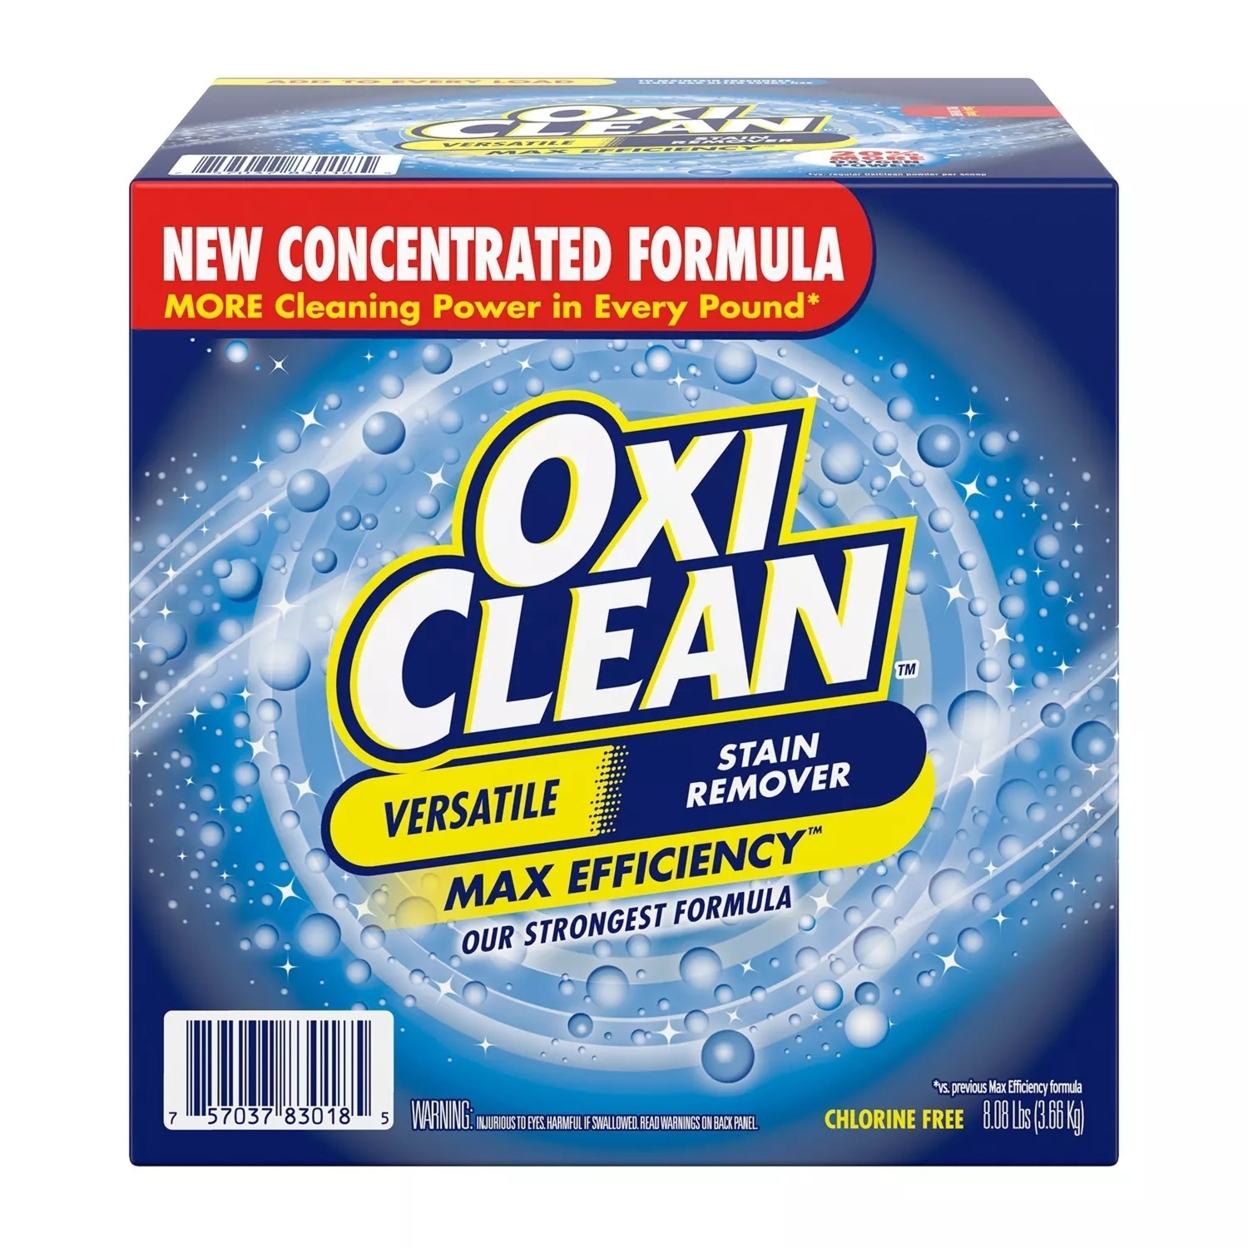 OxiClean Max Efficiency Versatile Stain Remover Powder (8.08 Pounds)